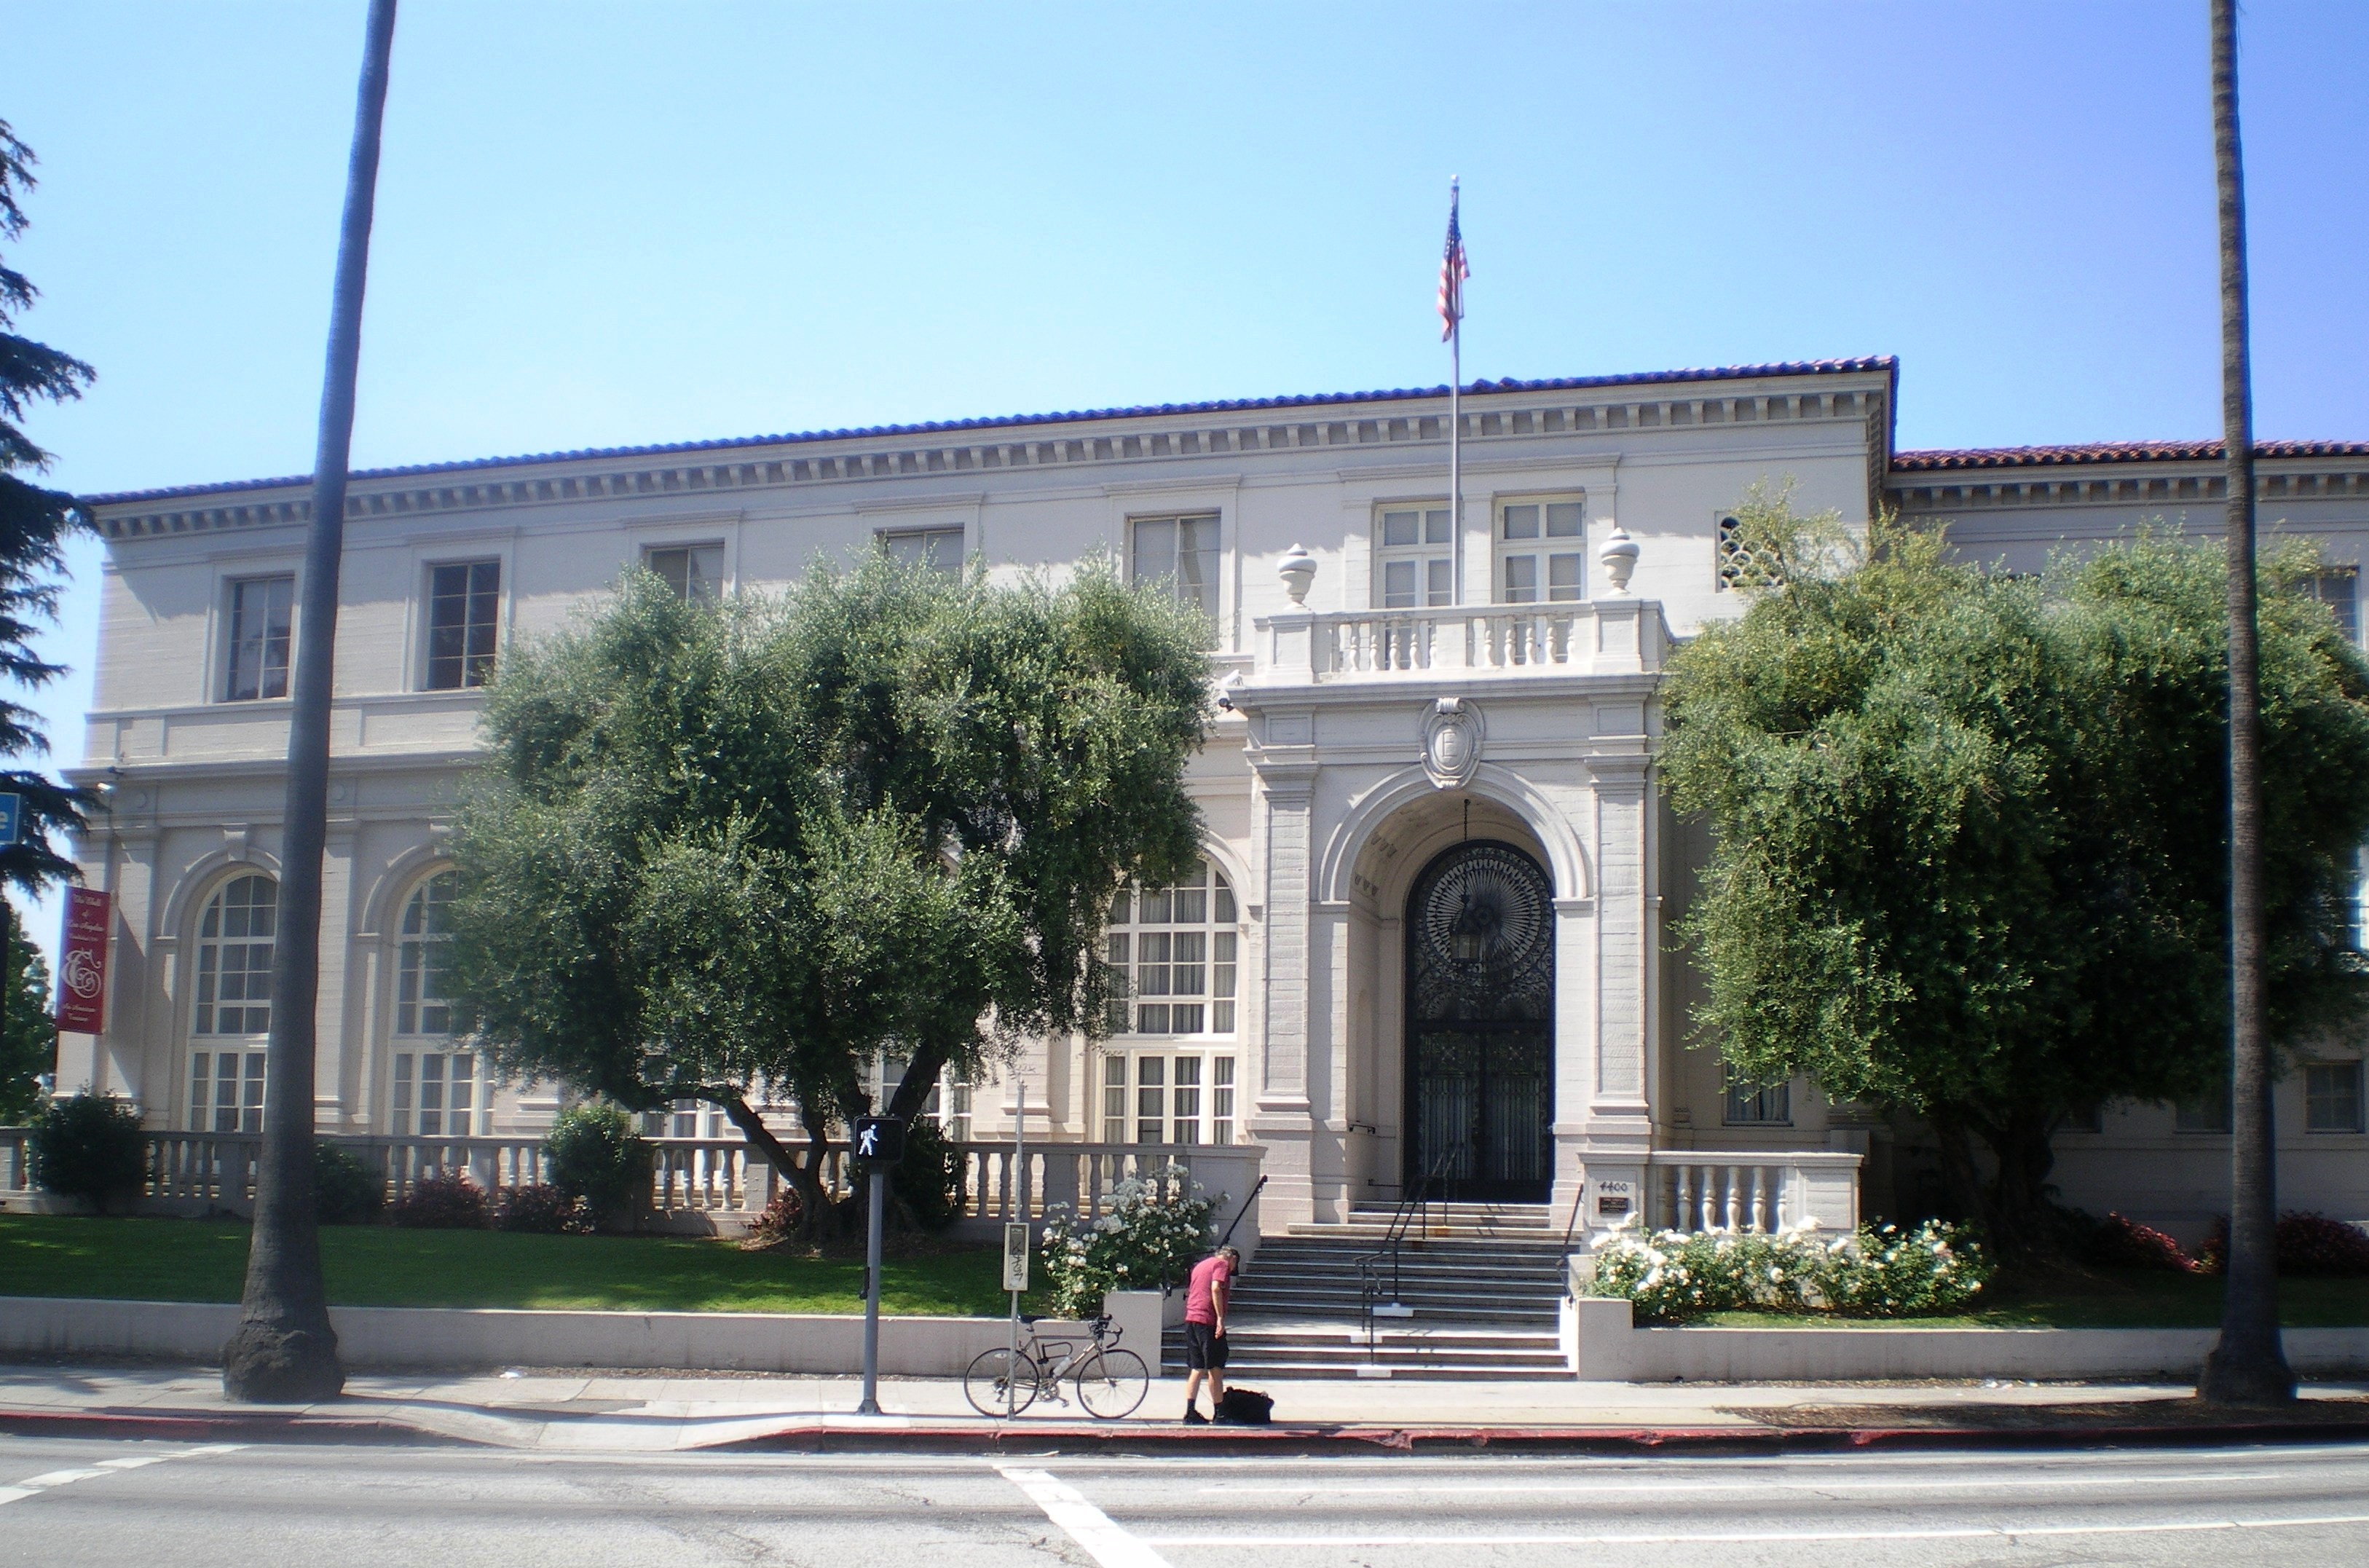 Wilshire Ebell Theater